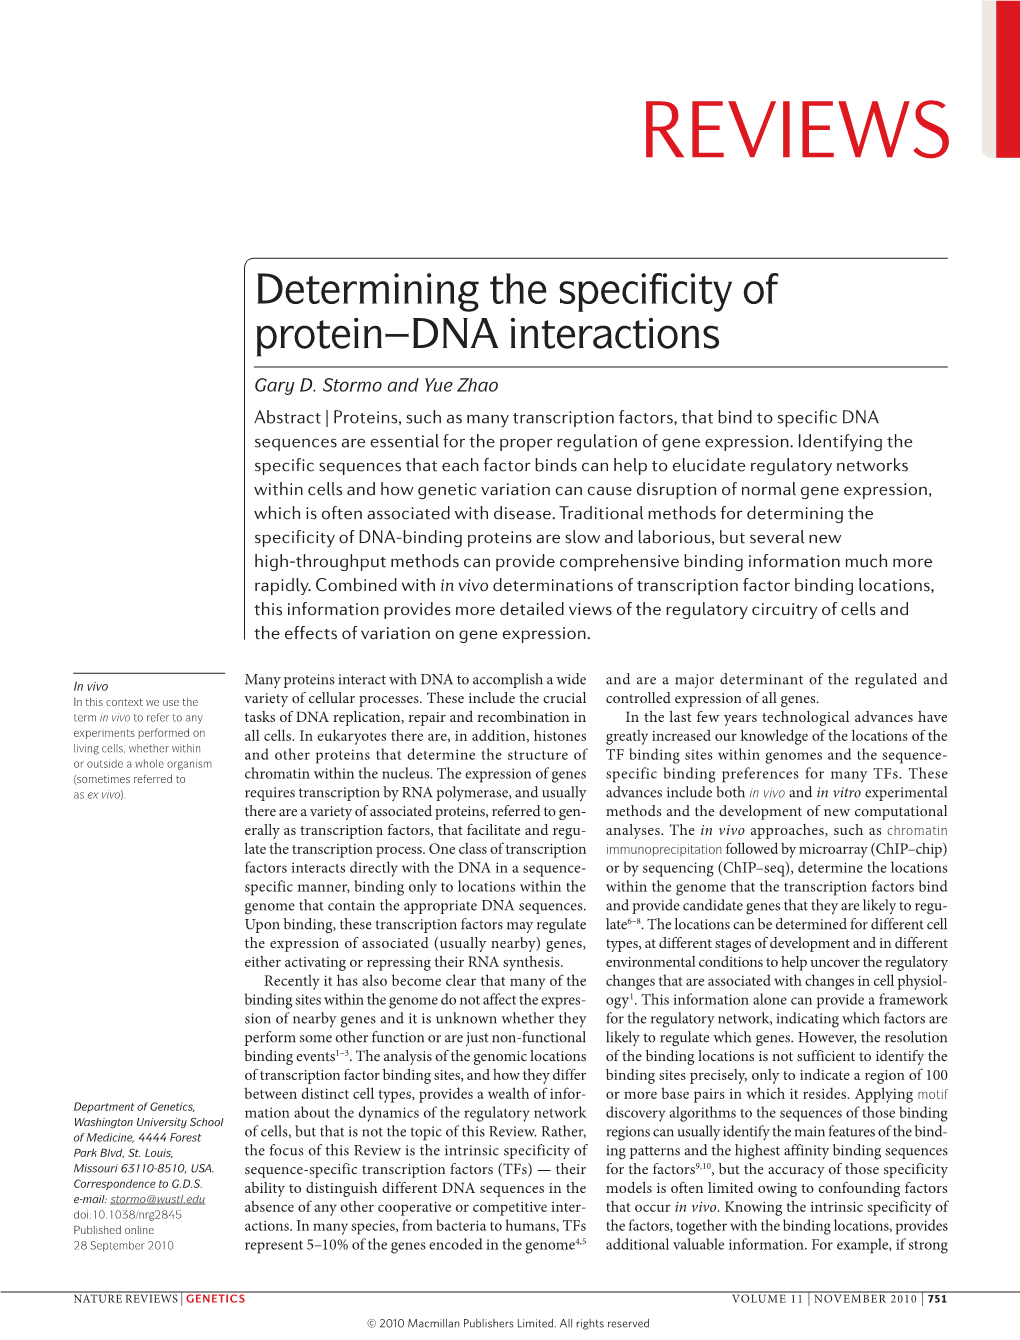 Determining the Specificity of Protein–DNA Interactions